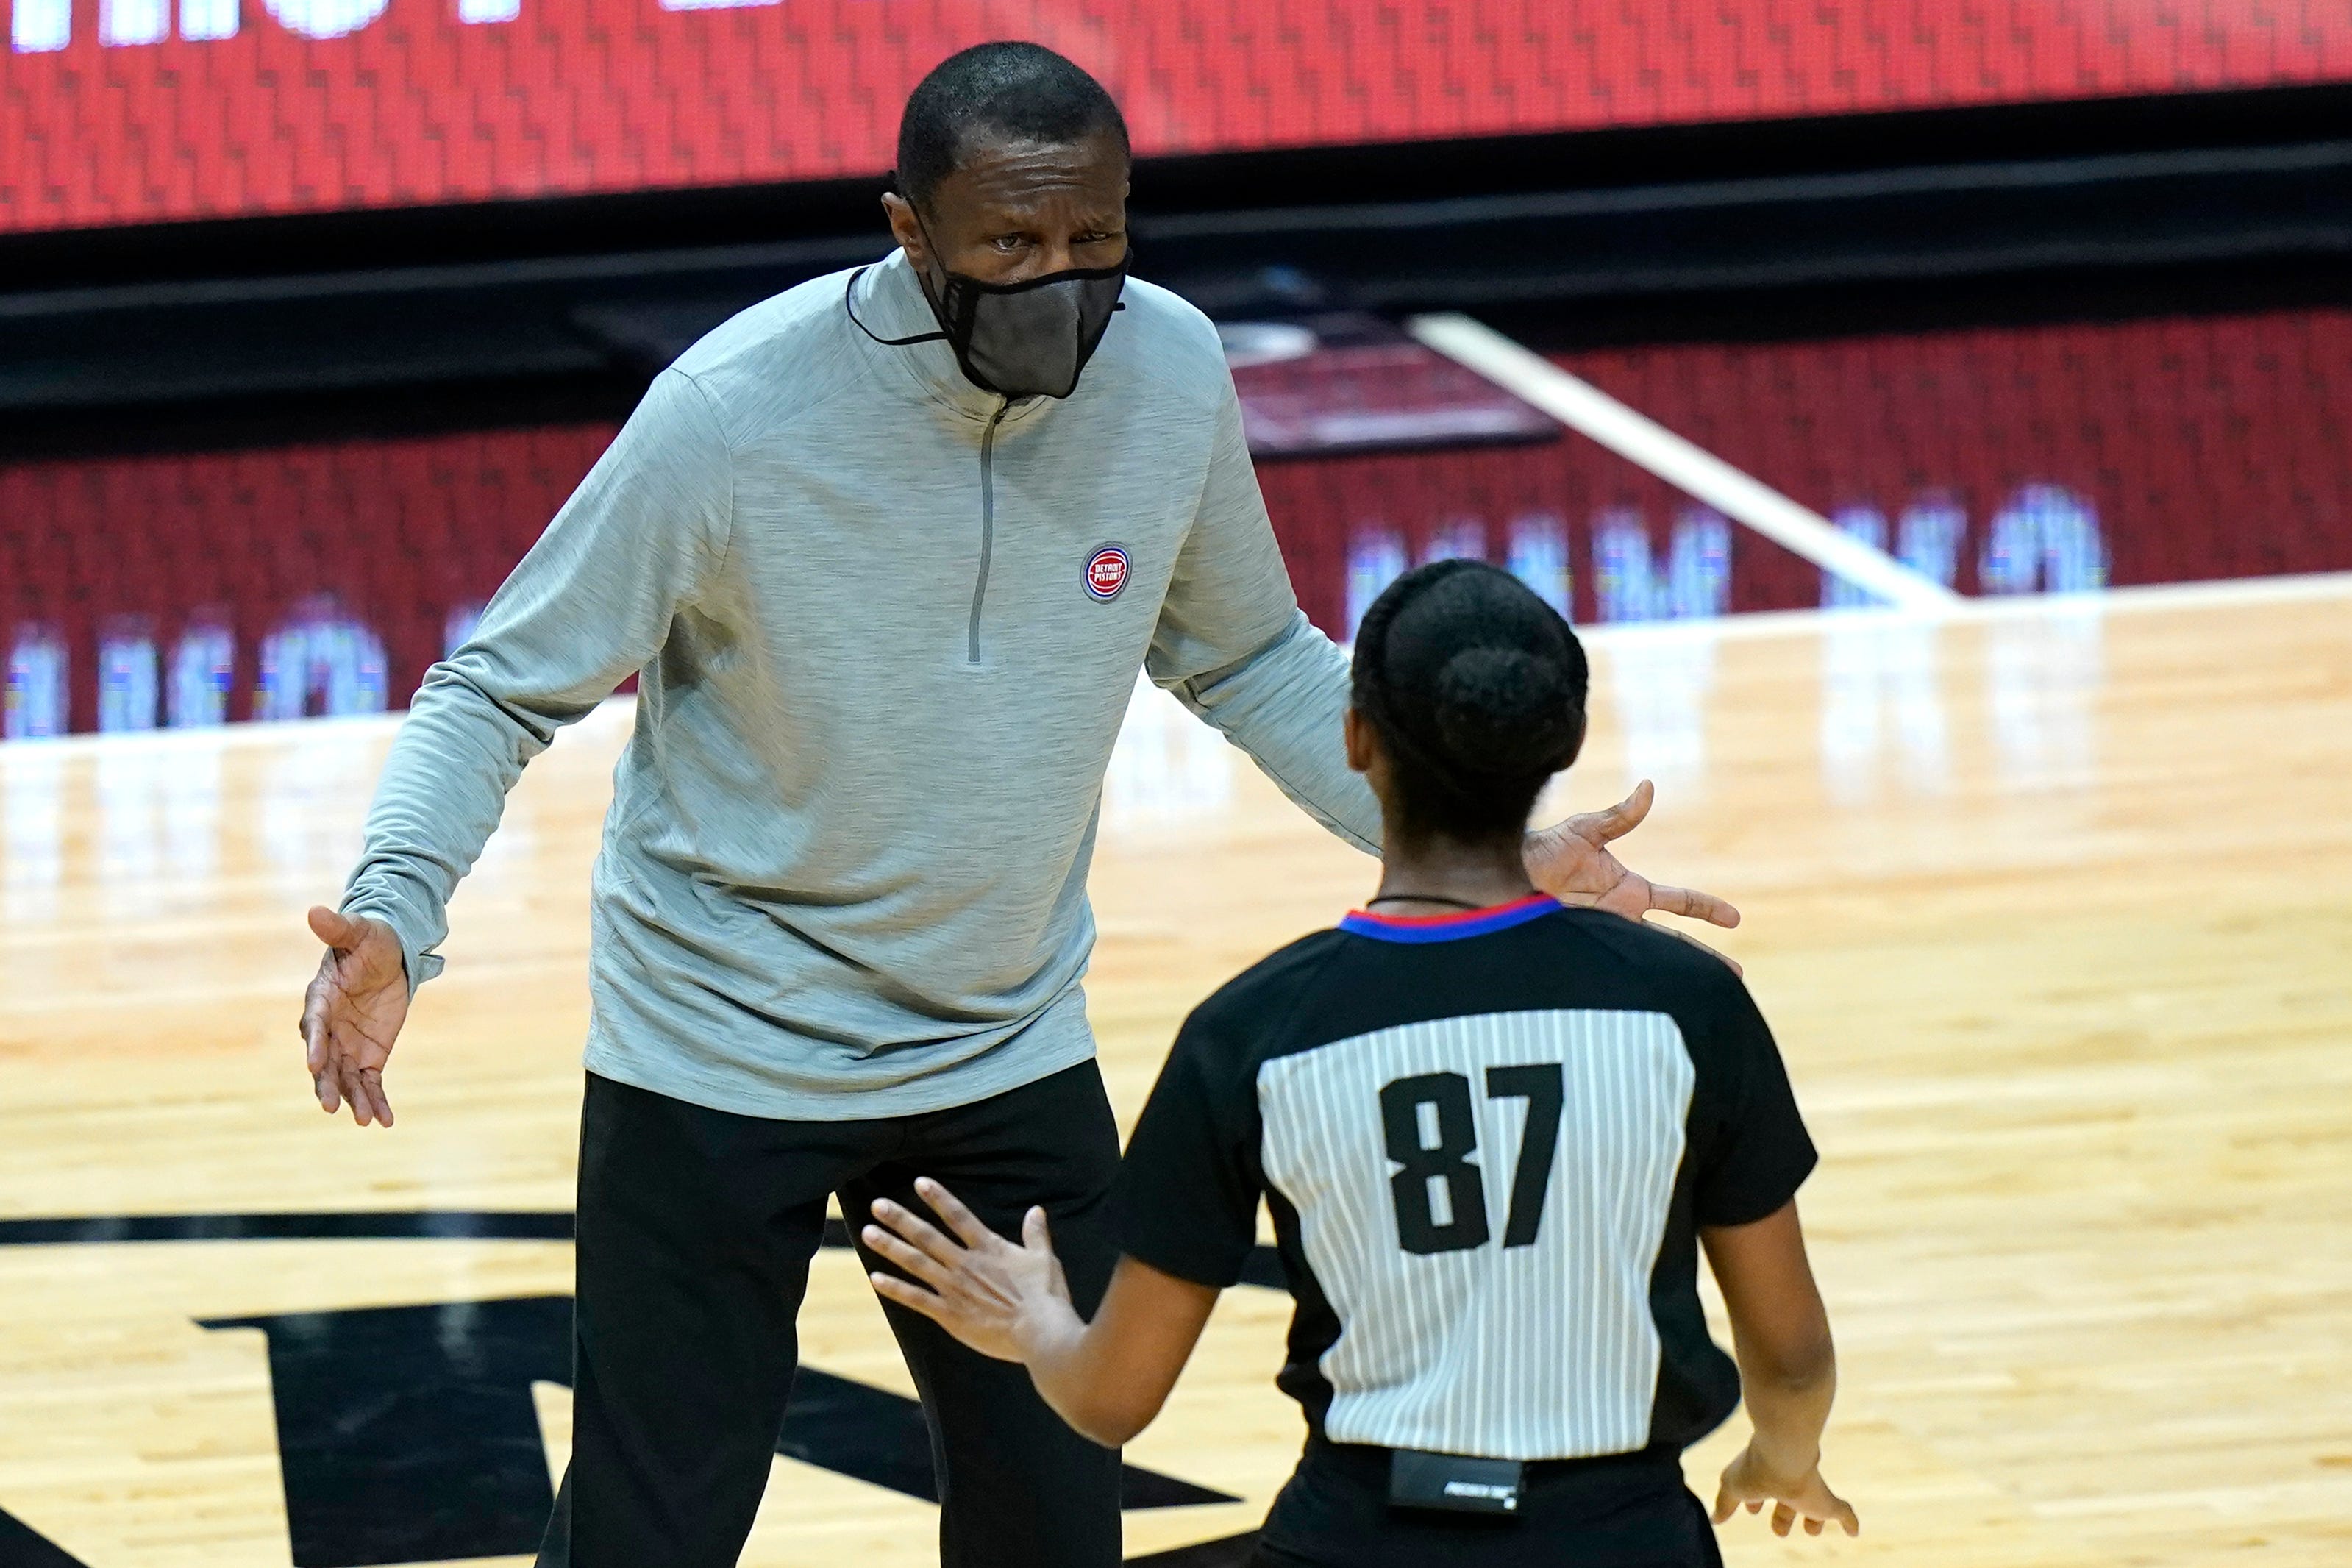 Detroit Pistons head coach Dwane Casey, left, argues a call with official Danielle Scott (87) during the first half.